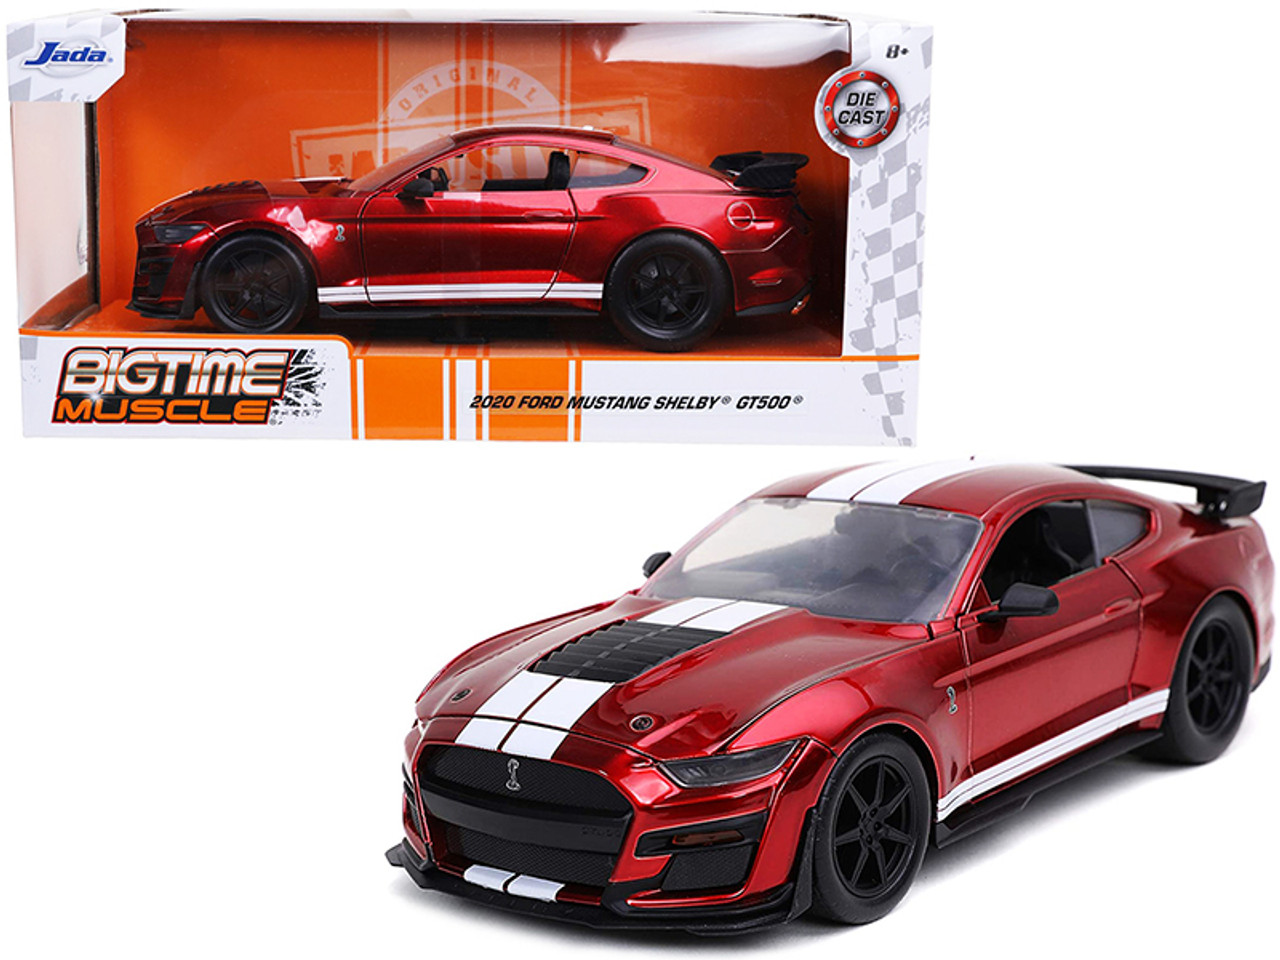 2020 Ford Mustang Shelby GT500 Candy Red with White Stripes "Bigtime Muscle" 1/24 Diecast Model Car by Jada